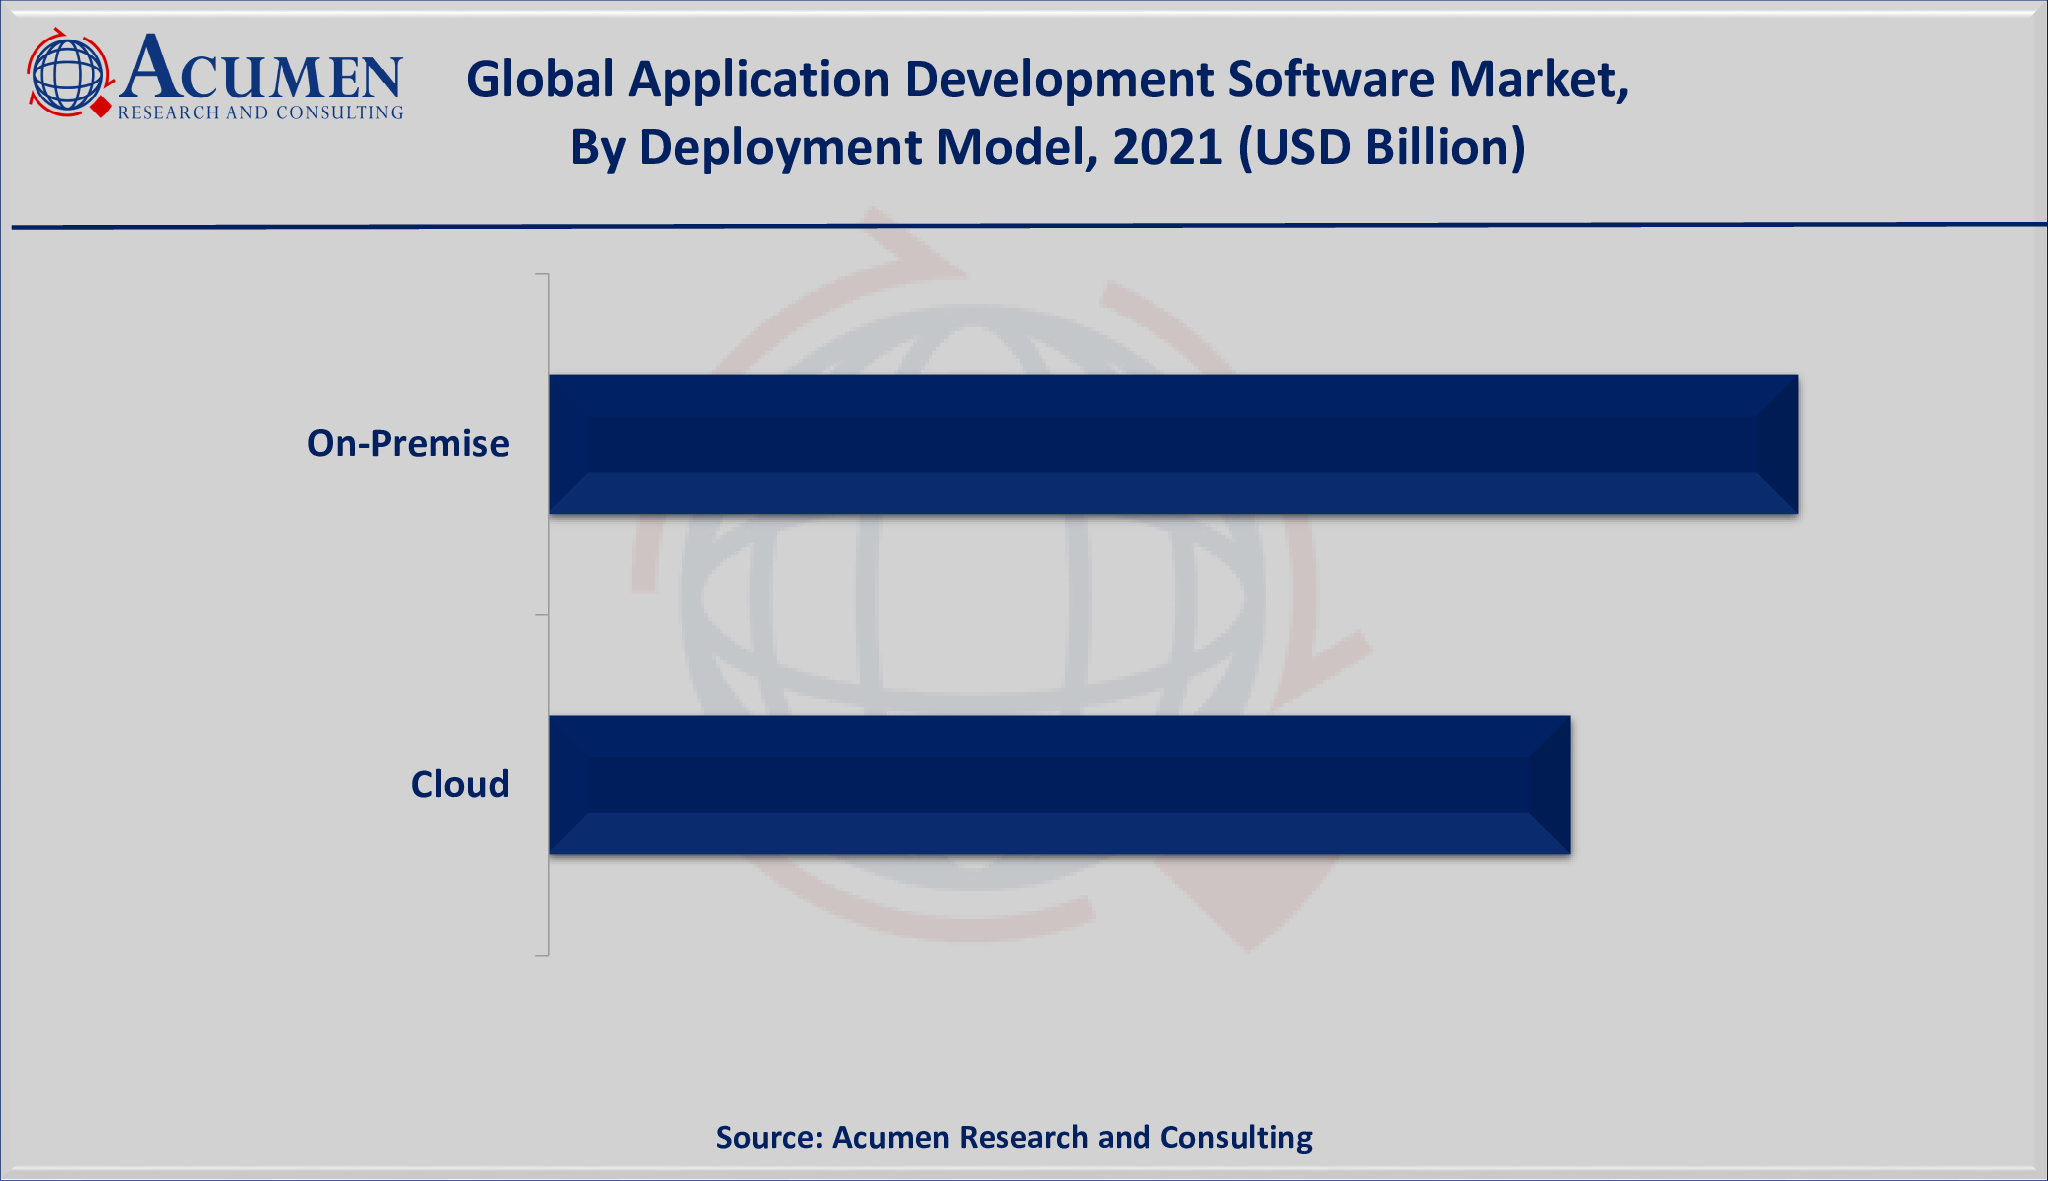 Application Development Software Market Size accounted for USD 187 Billion in 2021 and is estimated to achieve a market size of USD 1,628 Billion by 2030